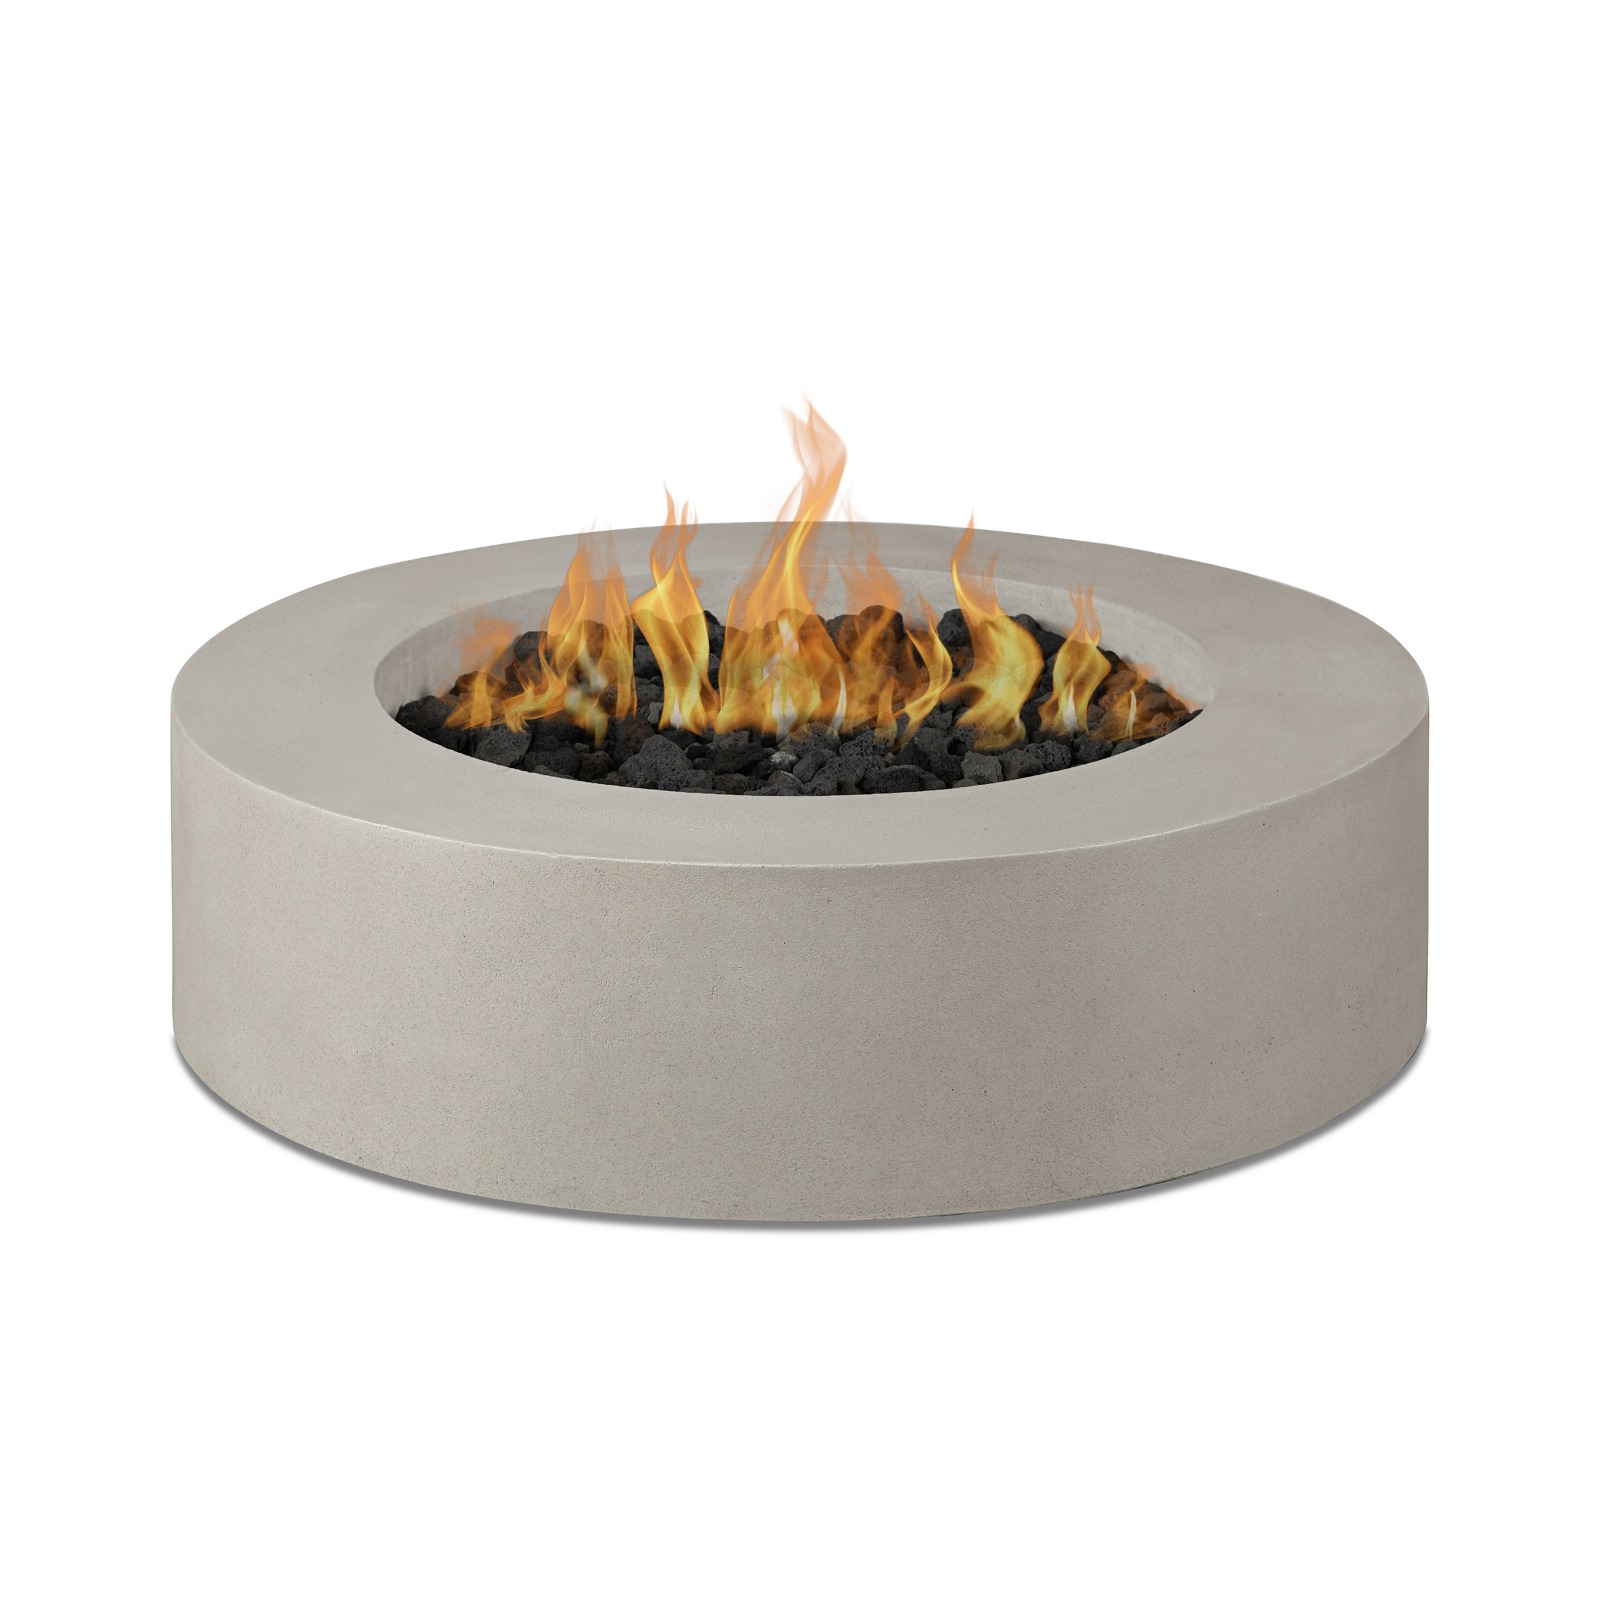 43" La Valle  Round Propane Fire Table in Flint on white background alternate view